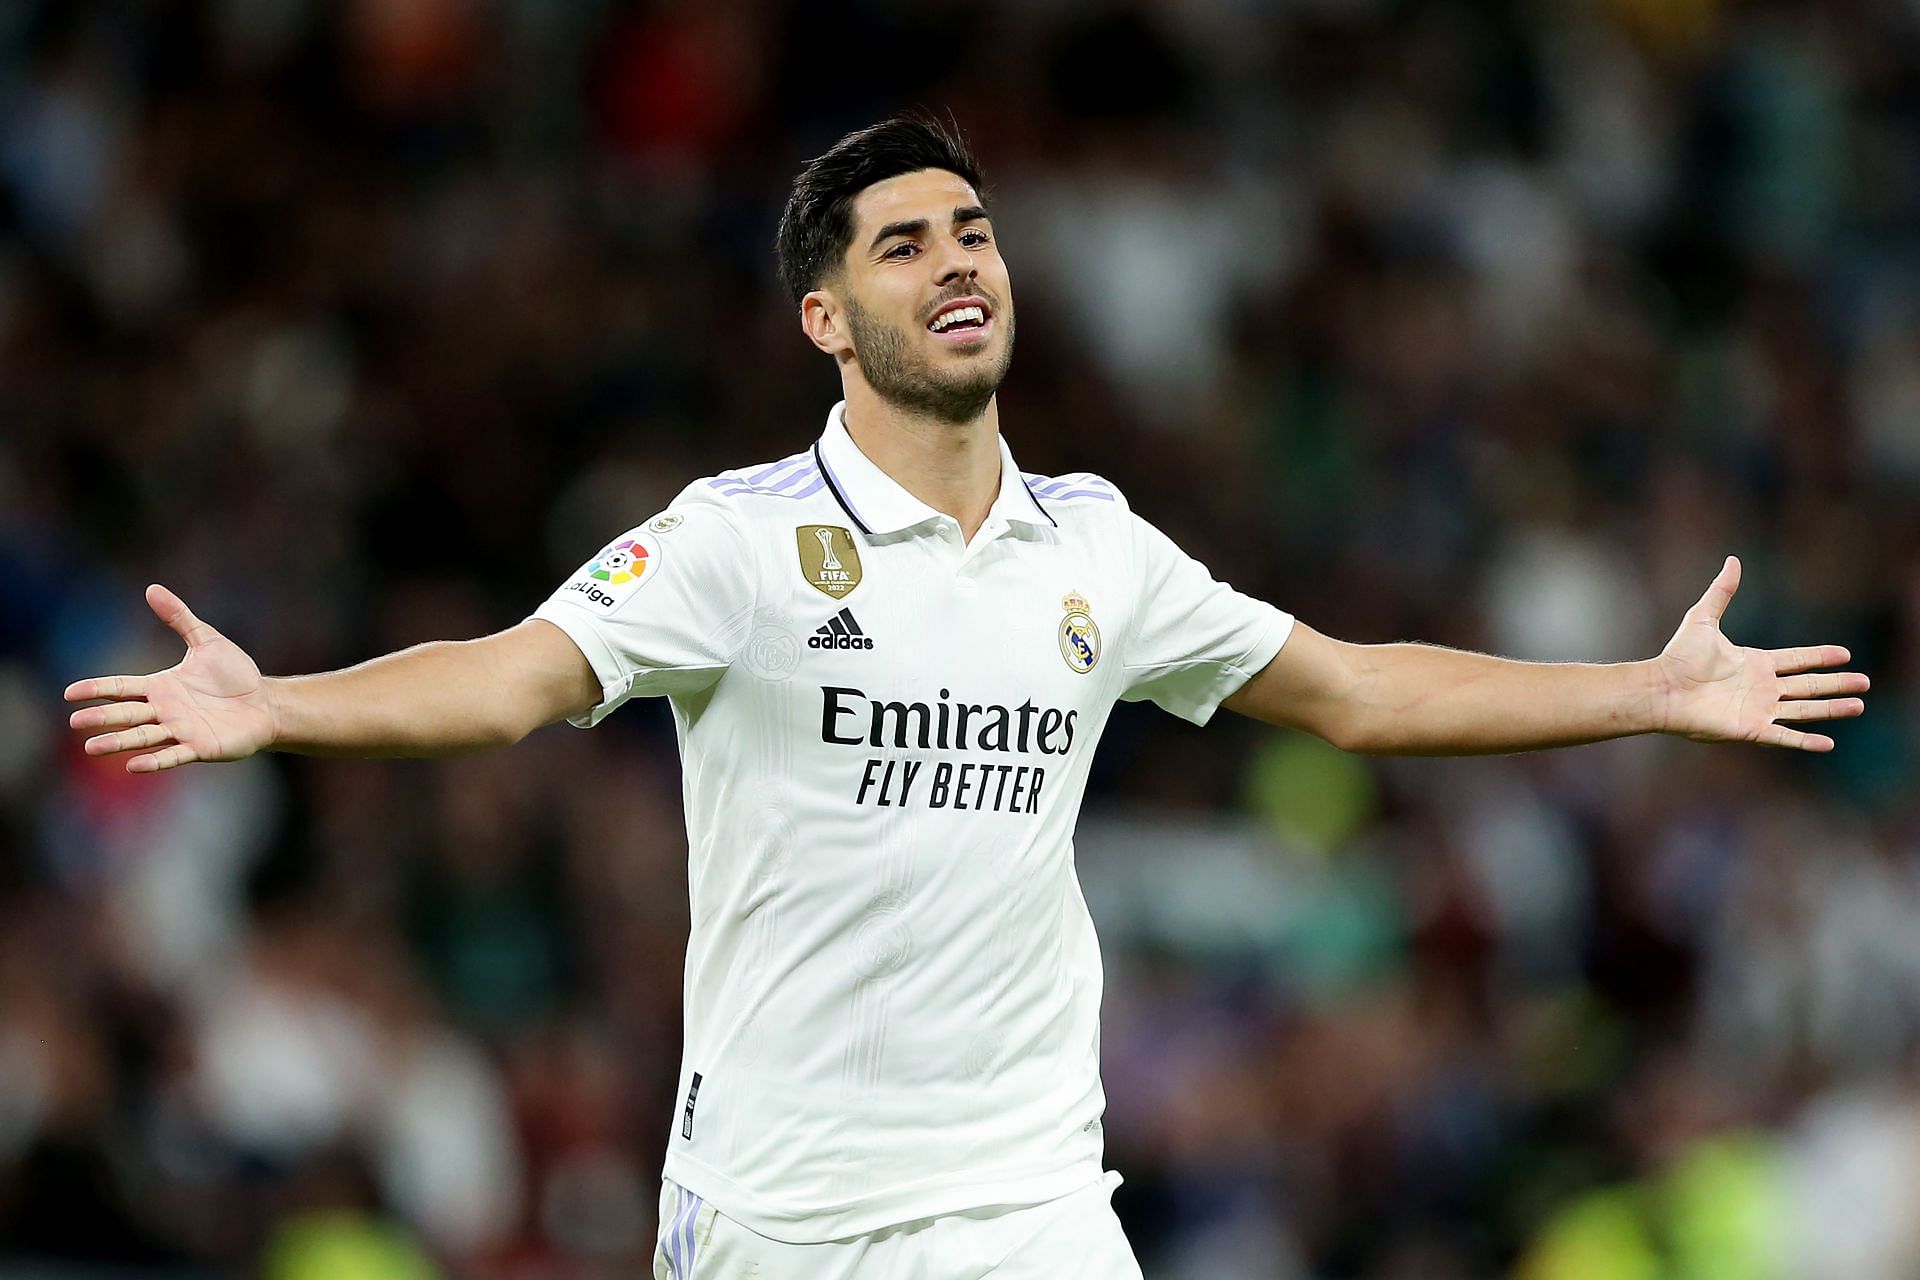 Asensio is set to leave the Bernabeu at the end of the season.